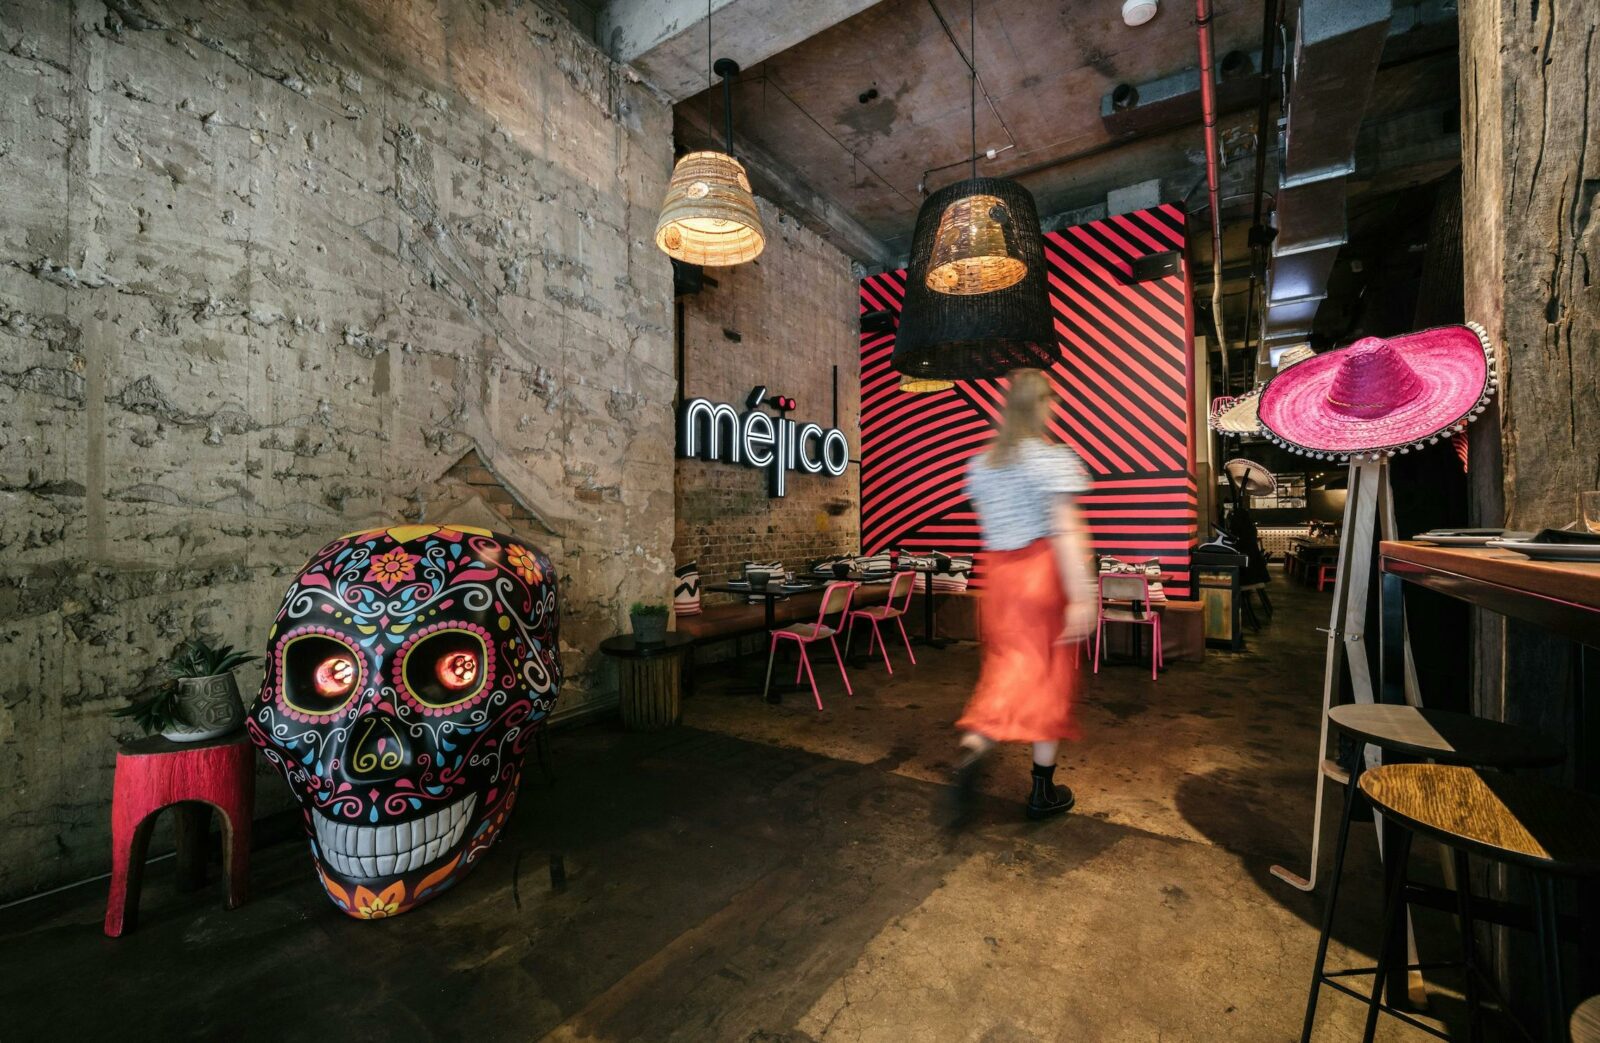 Blurred woman walking in front of large skull, into a restaurant